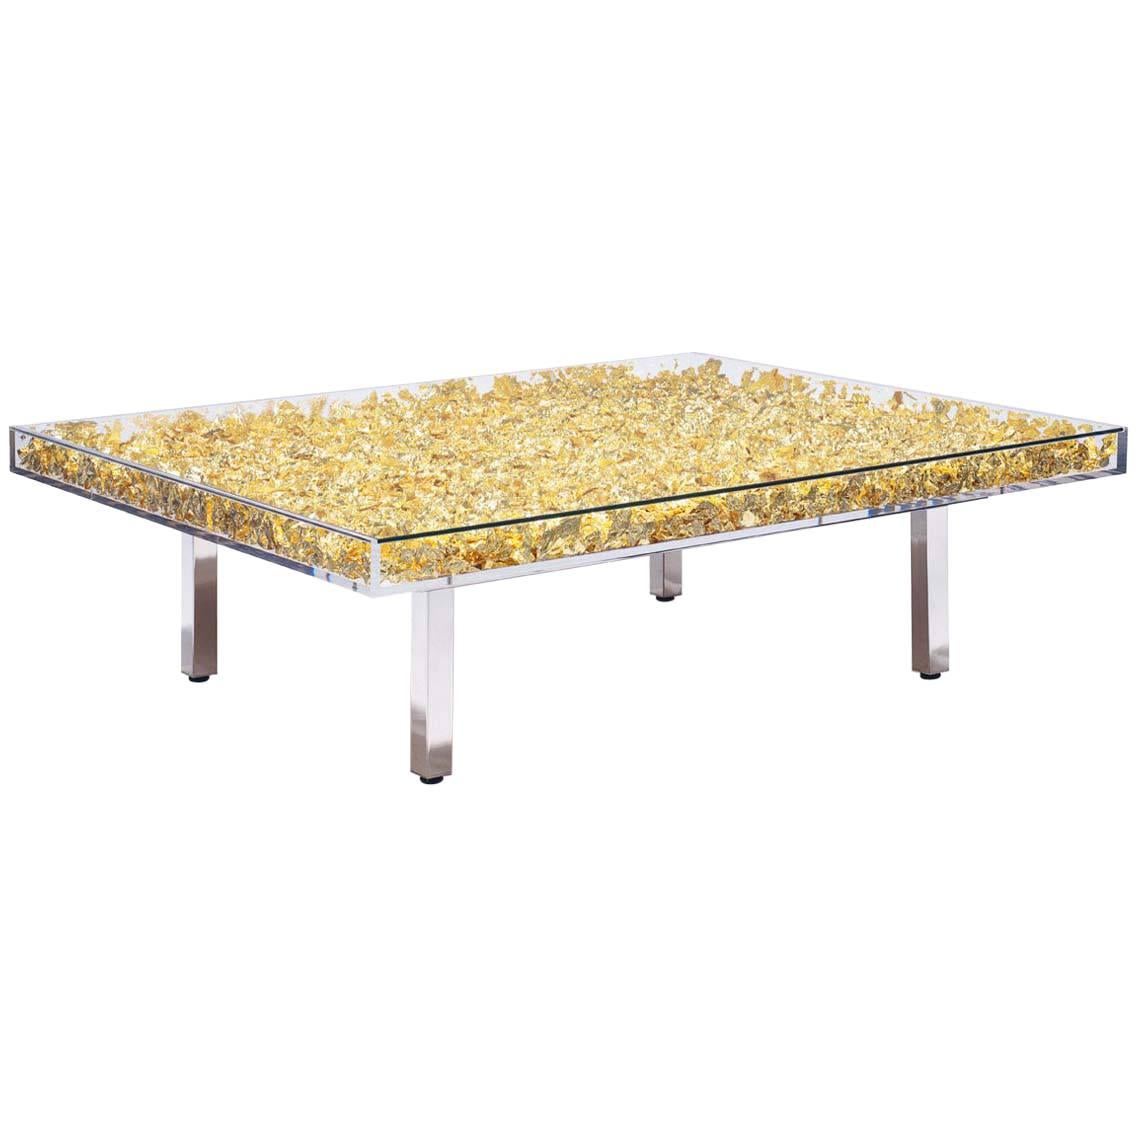 Monogold Table by Yves Klein For Sale